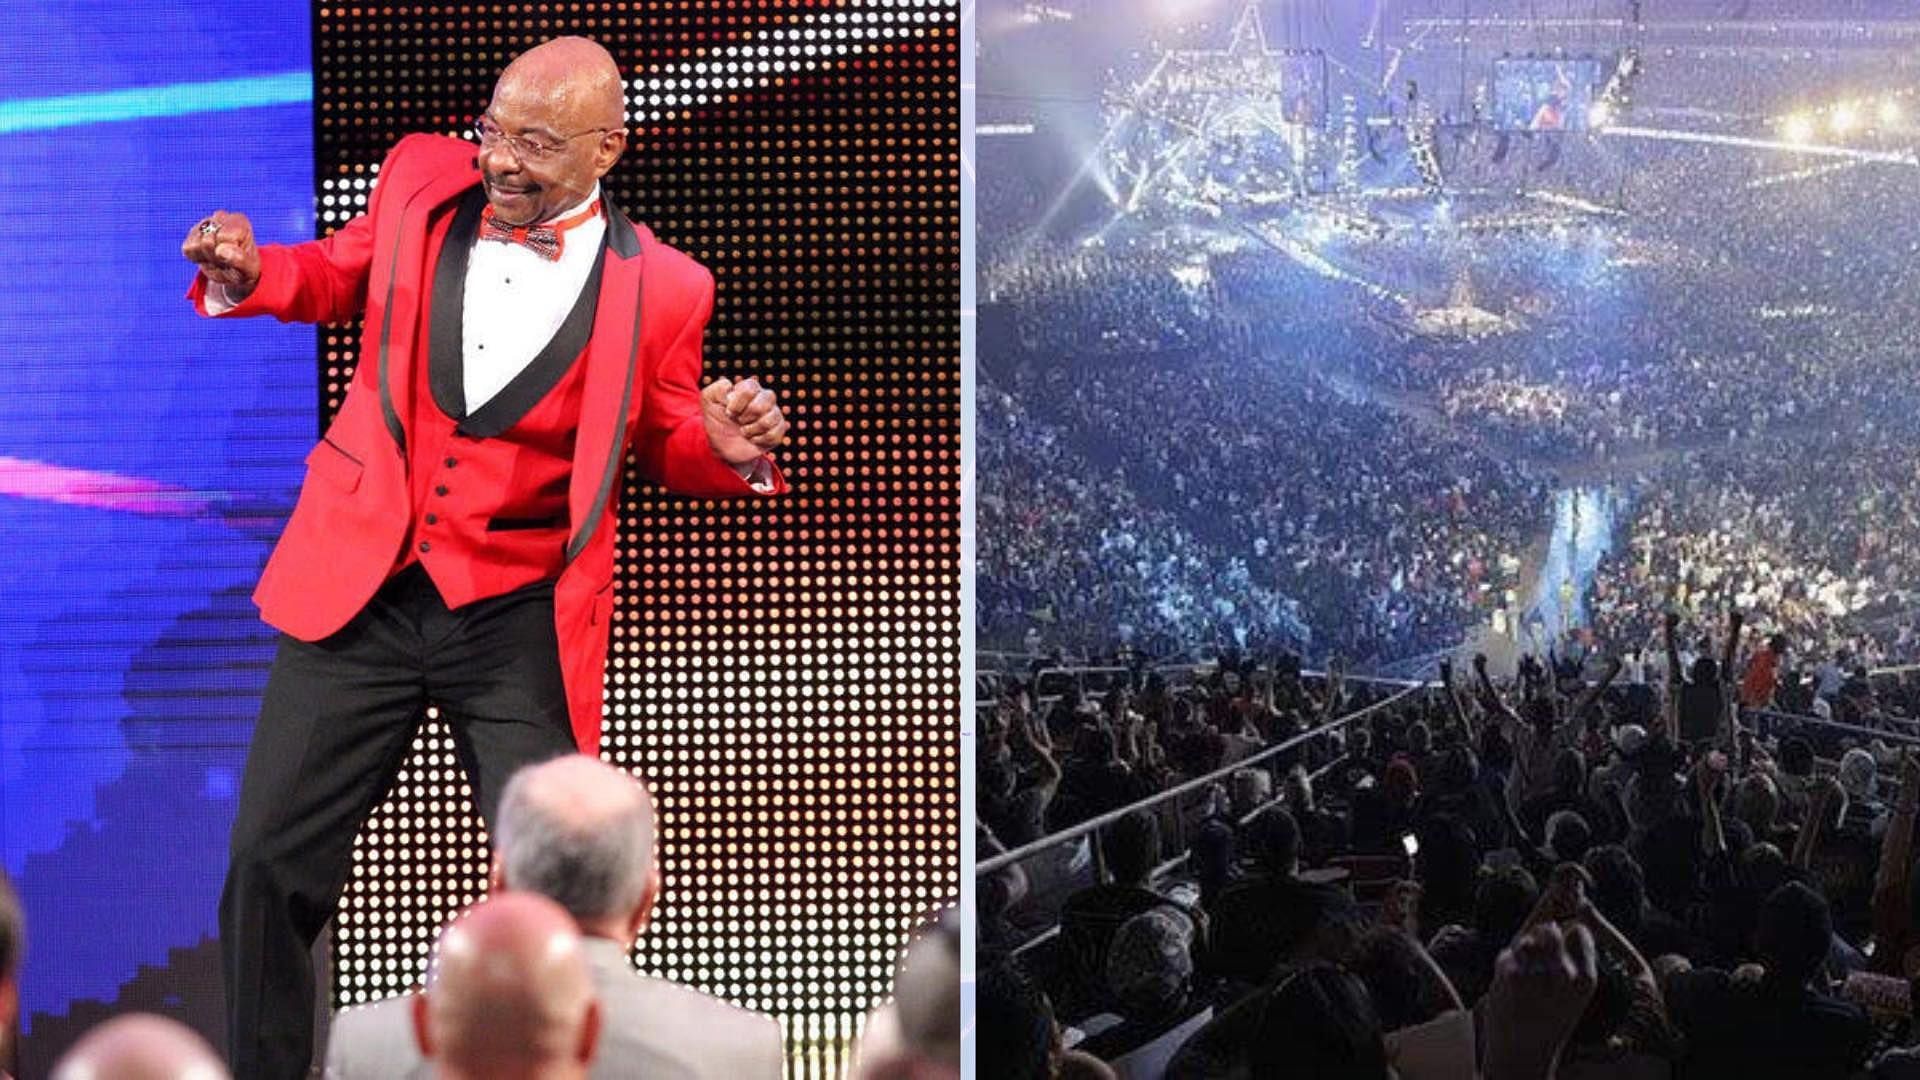 Teddy Long had some interesting things to say this week